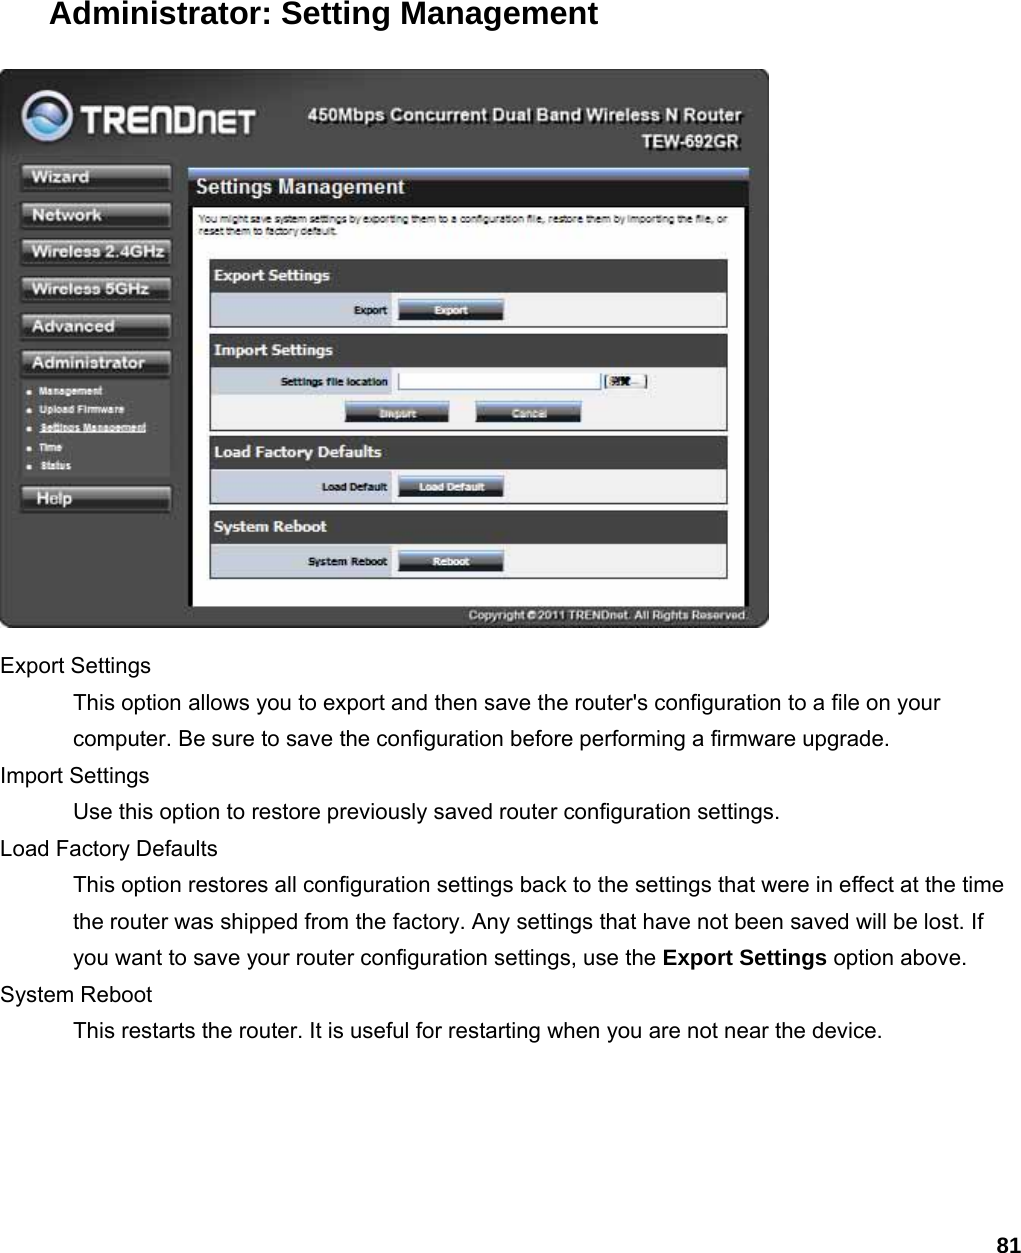 81 Administrator: Setting Management  Export Settings   This option allows you to export and then save the router&apos;s configuration to a file on your computer. Be sure to save the configuration before performing a firmware upgrade.   Import Settings   Use this option to restore previously saved router configuration settings.   Load Factory Defaults   This option restores all configuration settings back to the settings that were in effect at the time the router was shipped from the factory. Any settings that have not been saved will be lost. If you want to save your router configuration settings, use the Export Settings option above.   System Reboot   This restarts the router. It is useful for restarting when you are not near the device.   